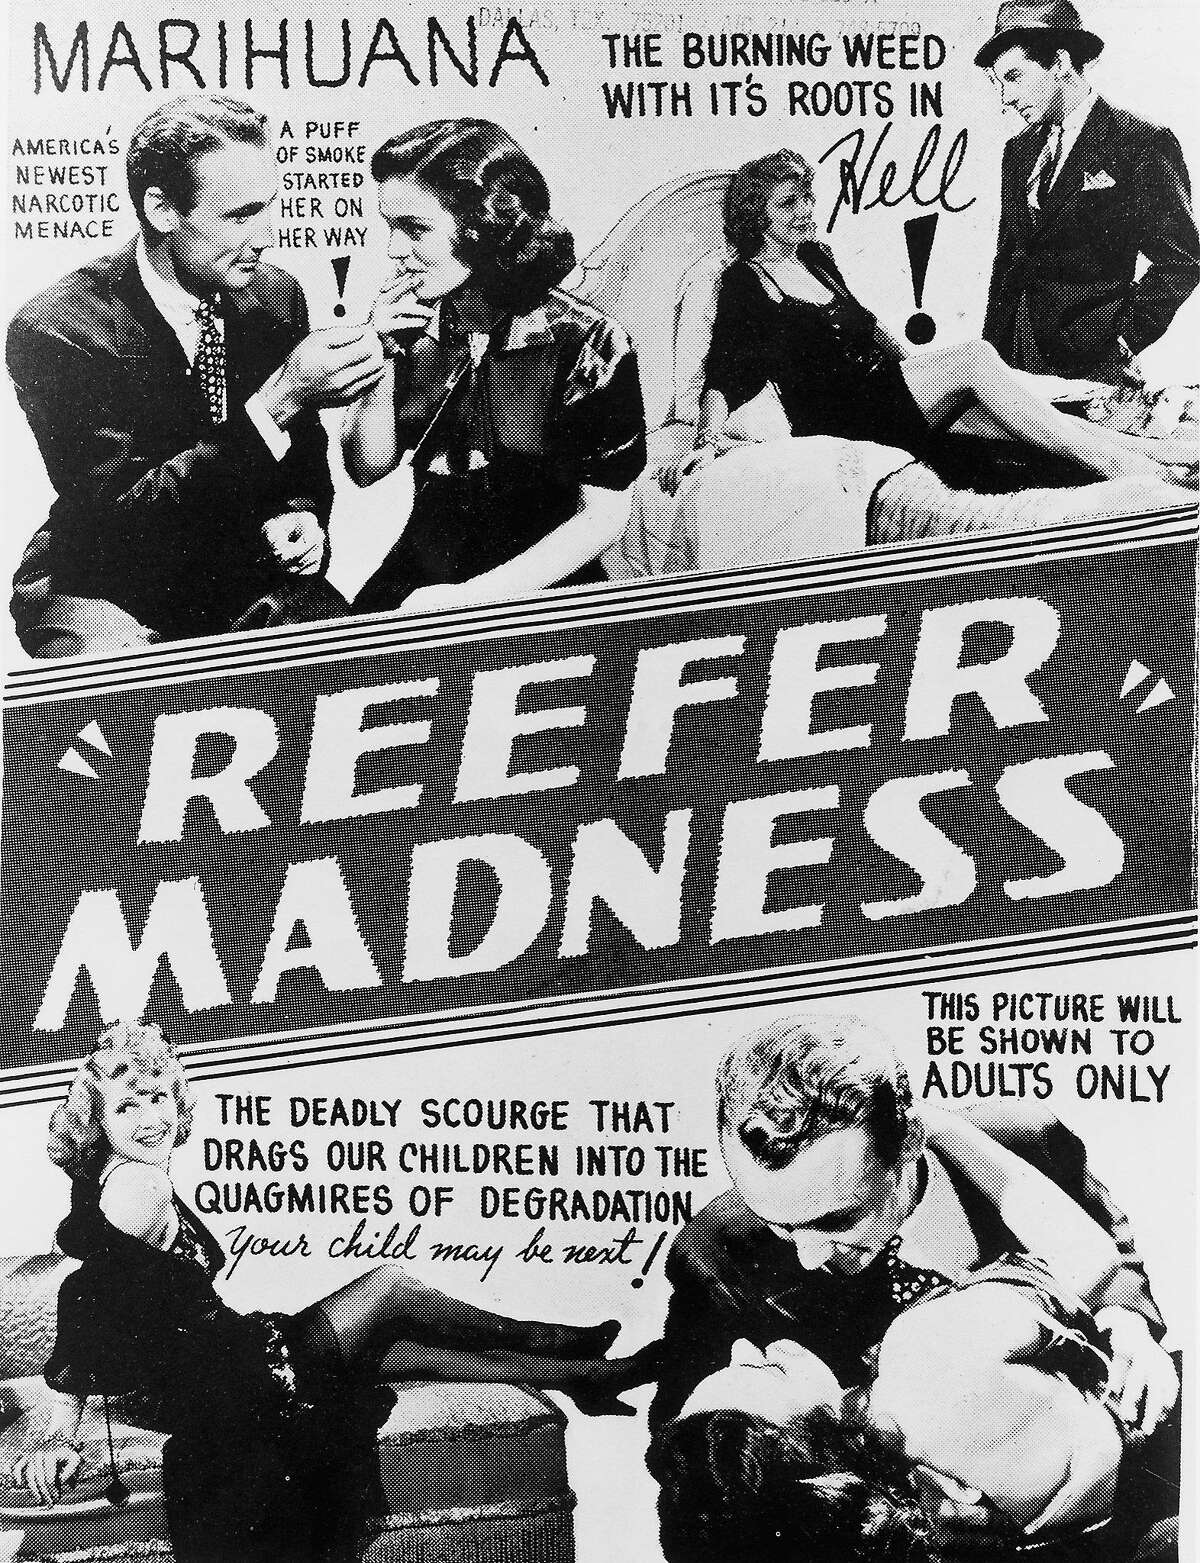 Reefer Madness  Movie Poster 1930s  Motion Picture Perils of Marijuana Usage 